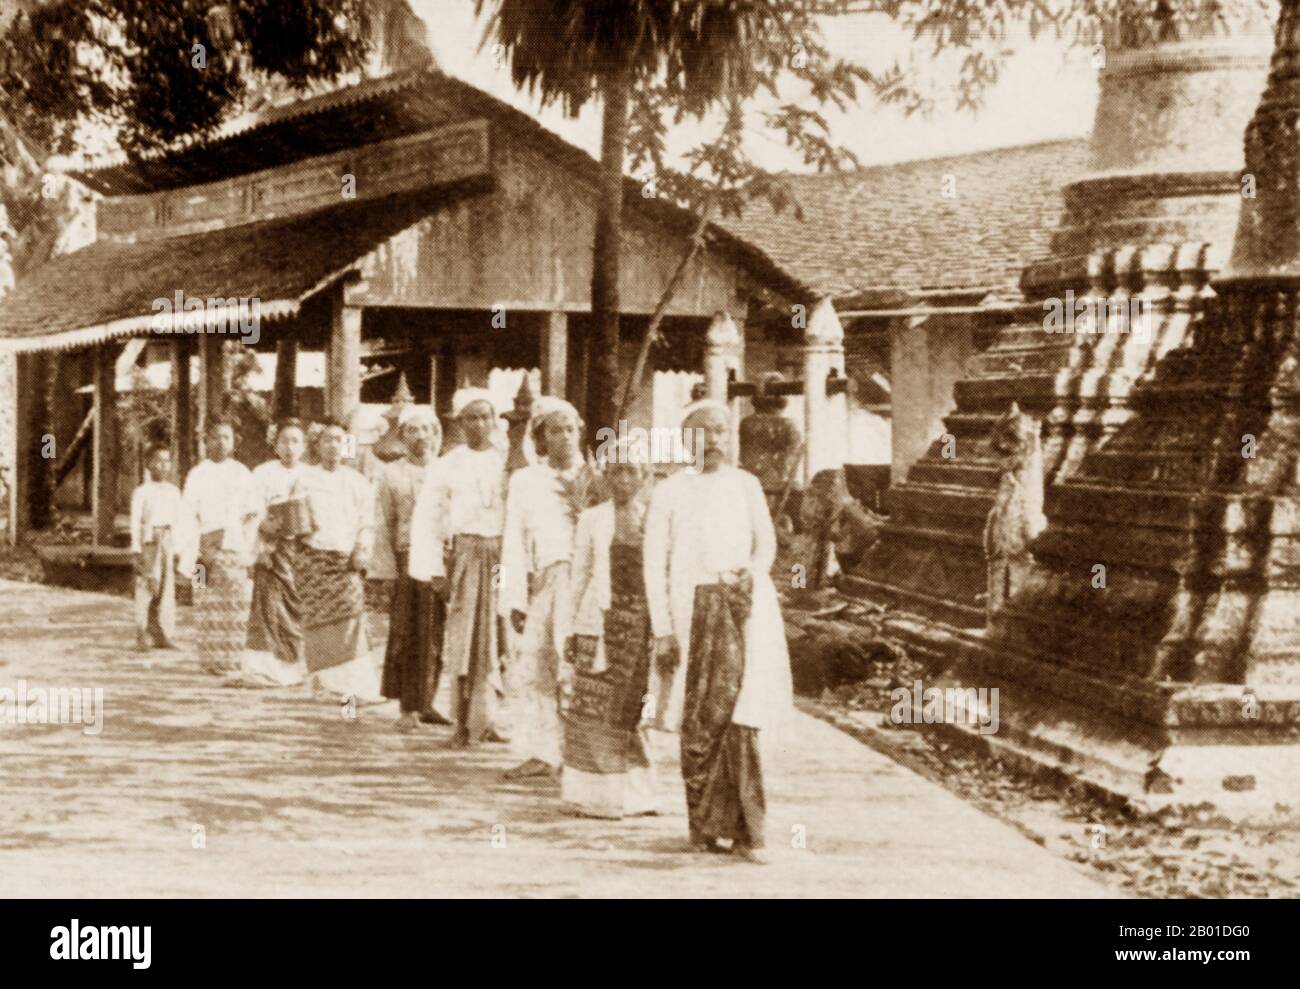 Burma: A high-ranking Burmese gentleman, followed by his family, leaves a Buddhist temple, c. 1892-1896.  Legend attributes the first Buddhist doctrine in Burma to 228 BCE when Sonna and Uttara, two ambassadors of the Emperor Ashoka the Great of India, came to the country with sacred texts. However, the golden era of Buddhism truly began in the 11th century after King Anawrahta of Pagan (Bagan) was converted to Theravada Buddhism. Today, 89% of the population of Burma is Theravada Buddhist. Stock Photo